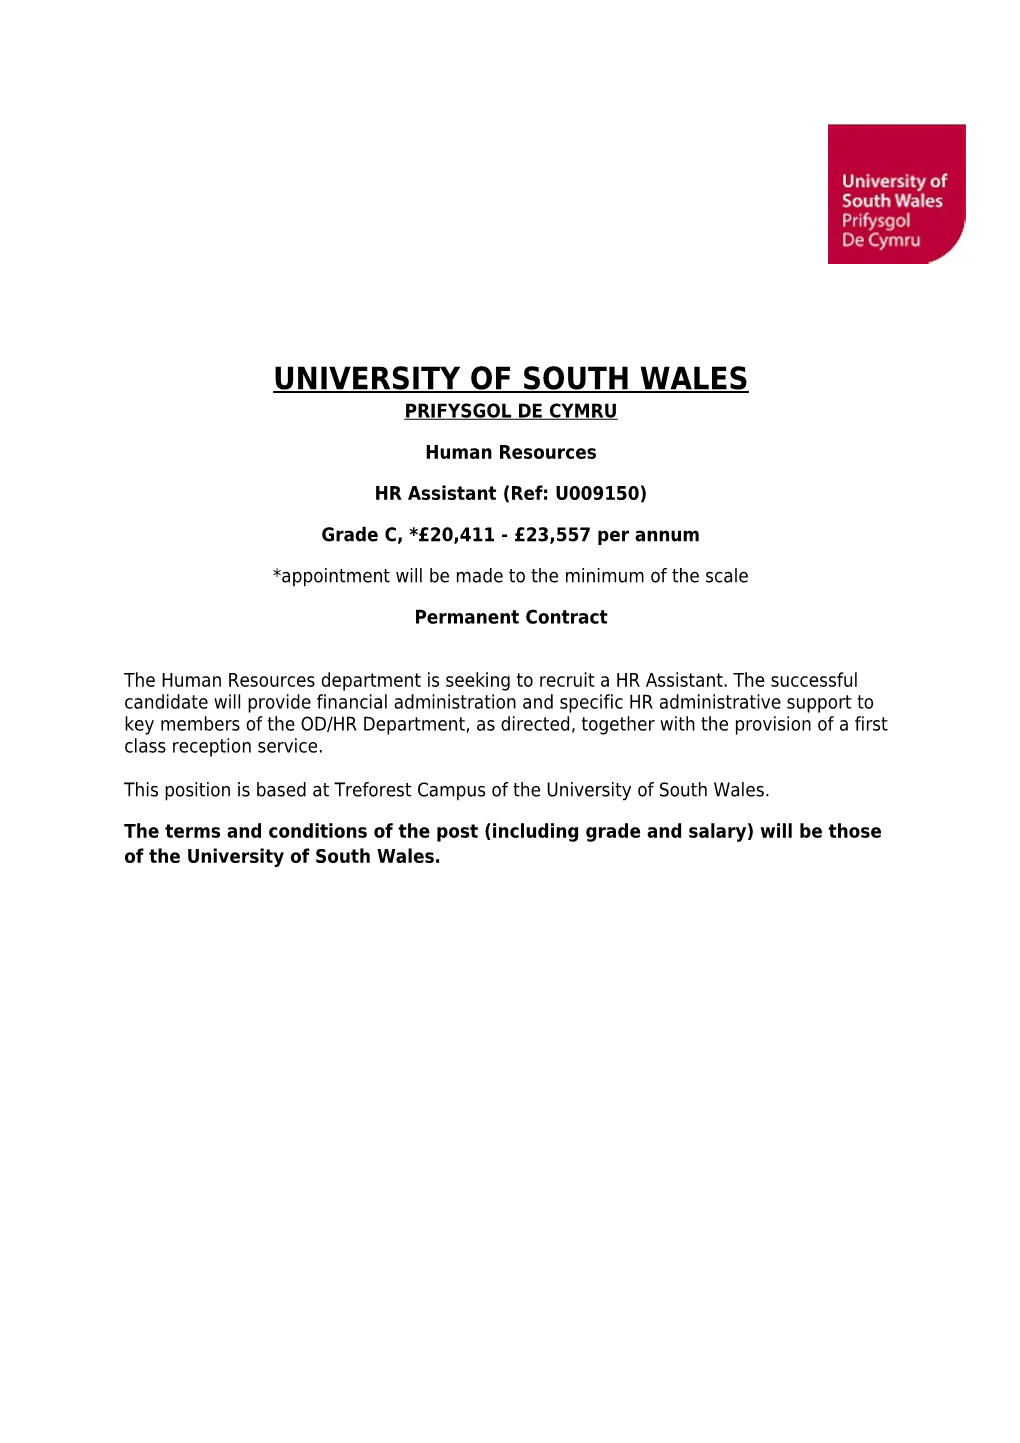 University of South Wales s1